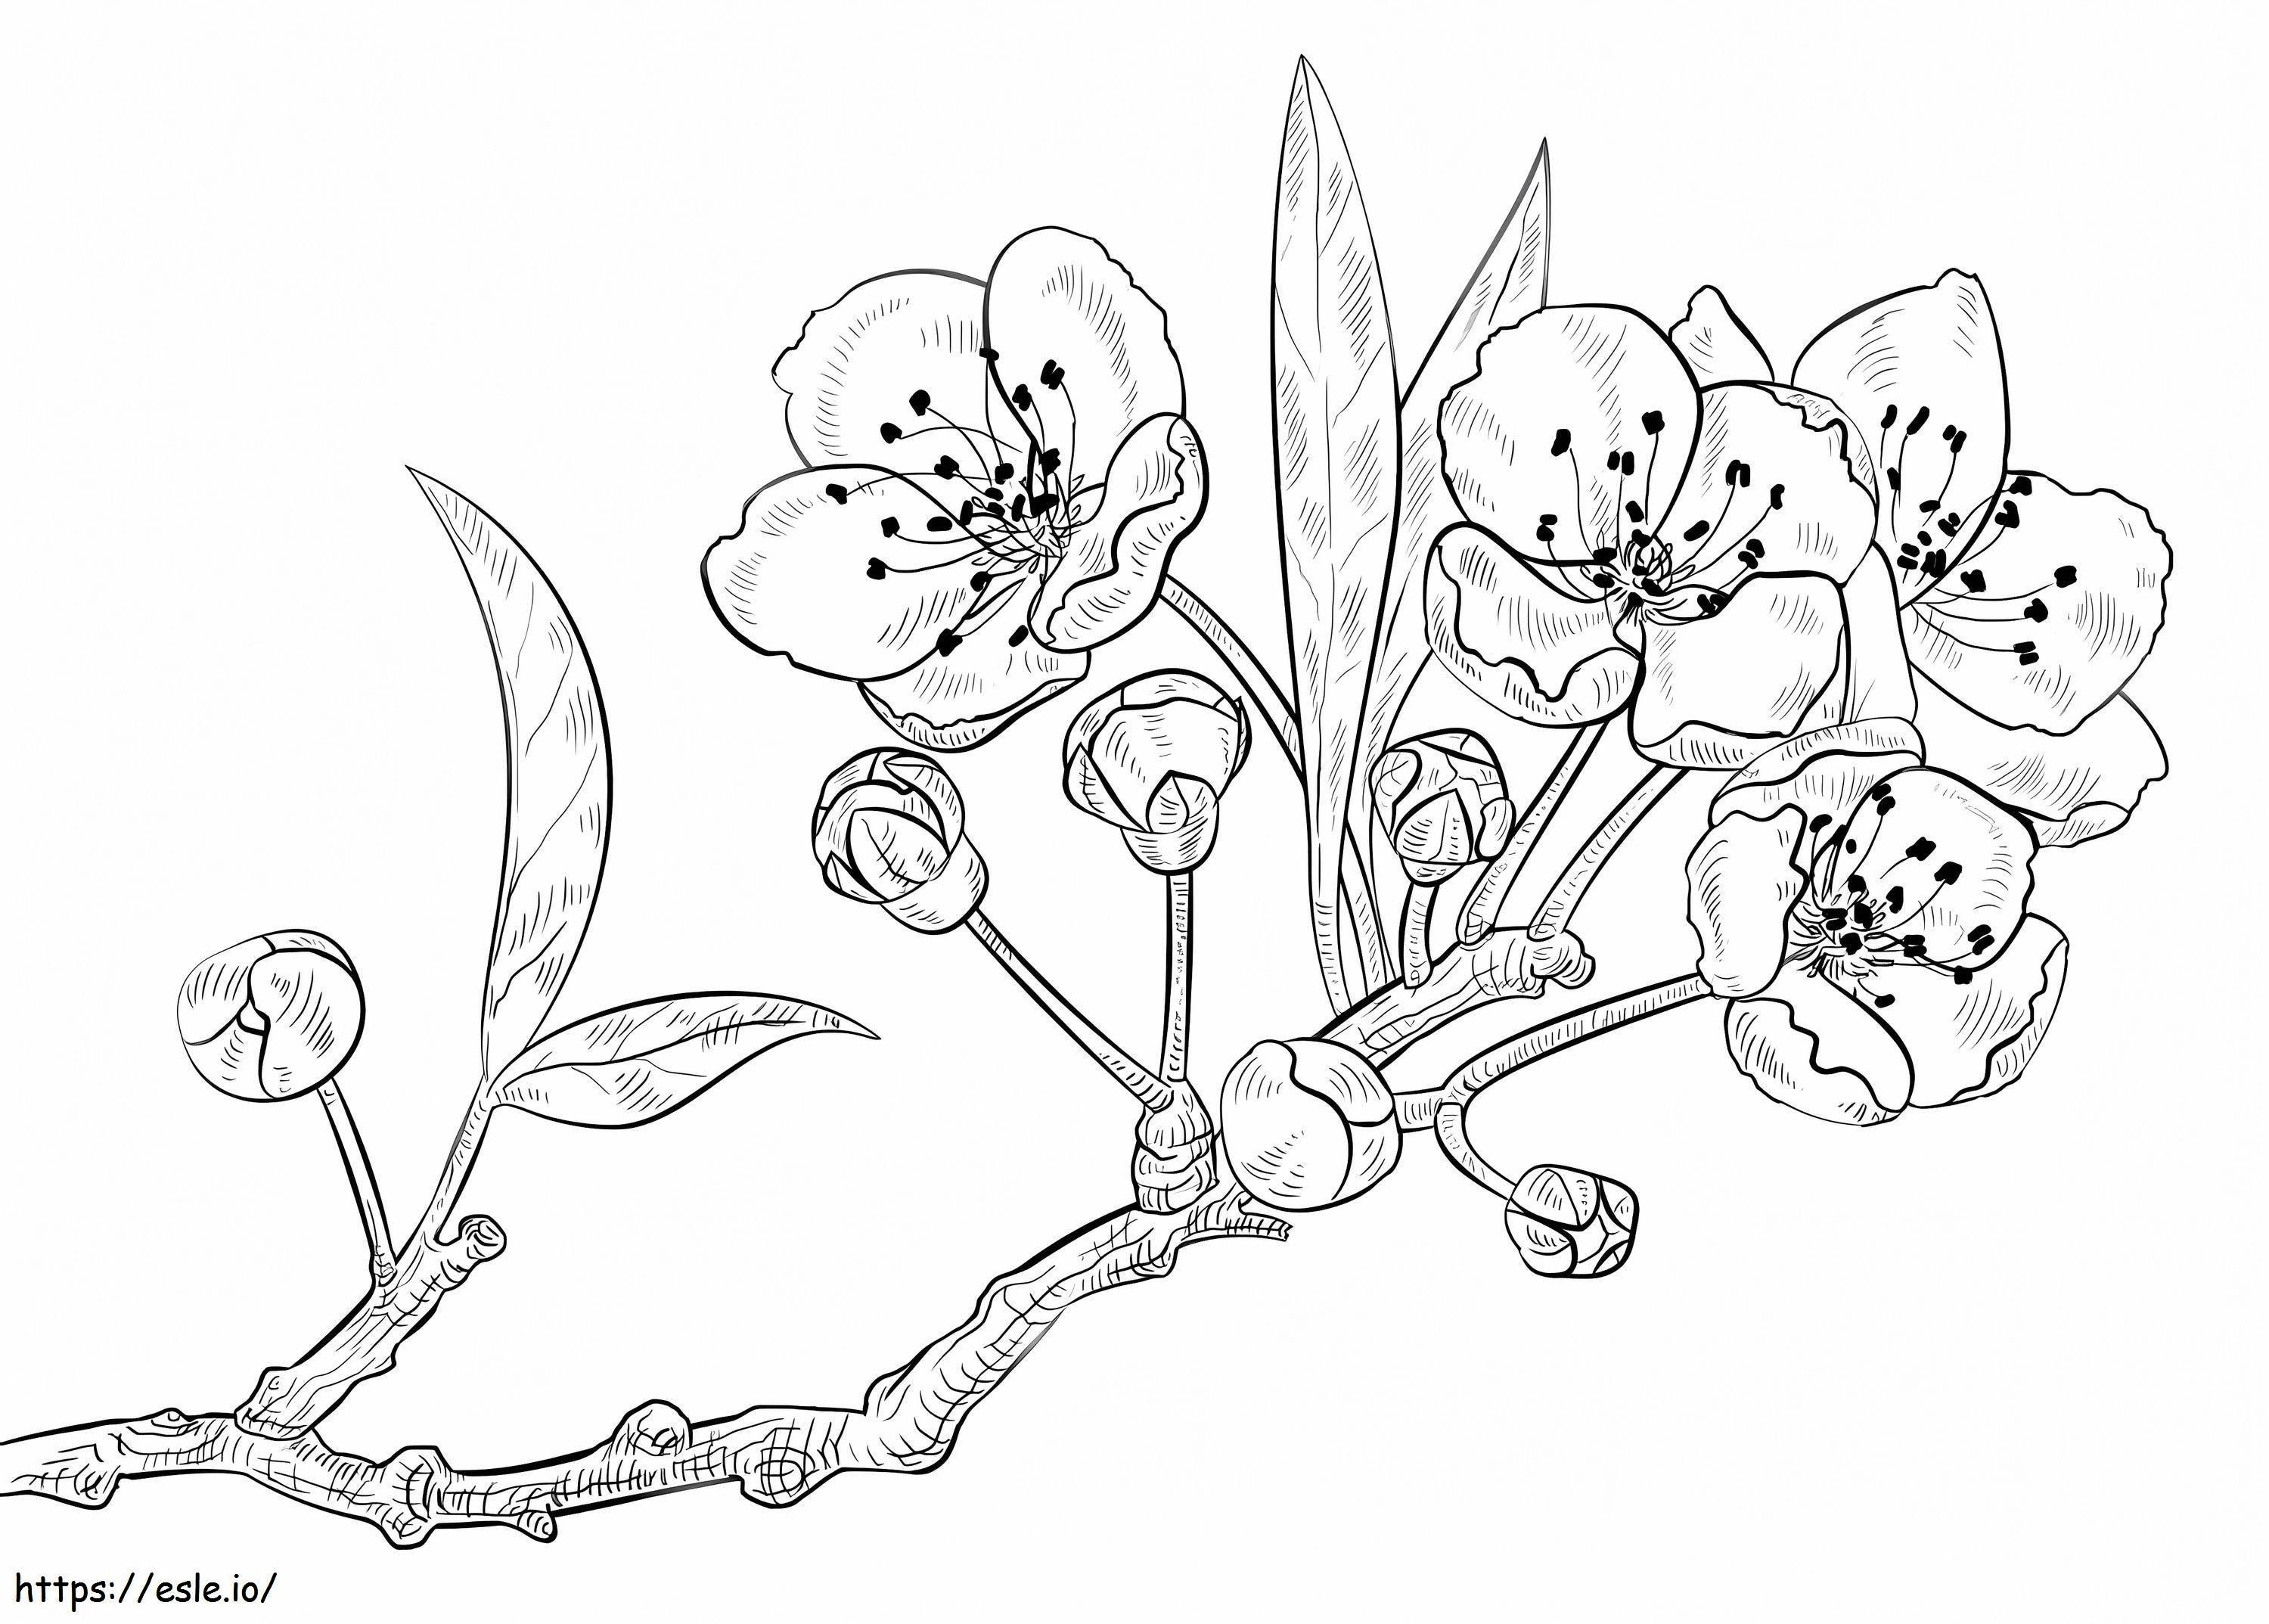 A Cherry Blossom Branch coloring page